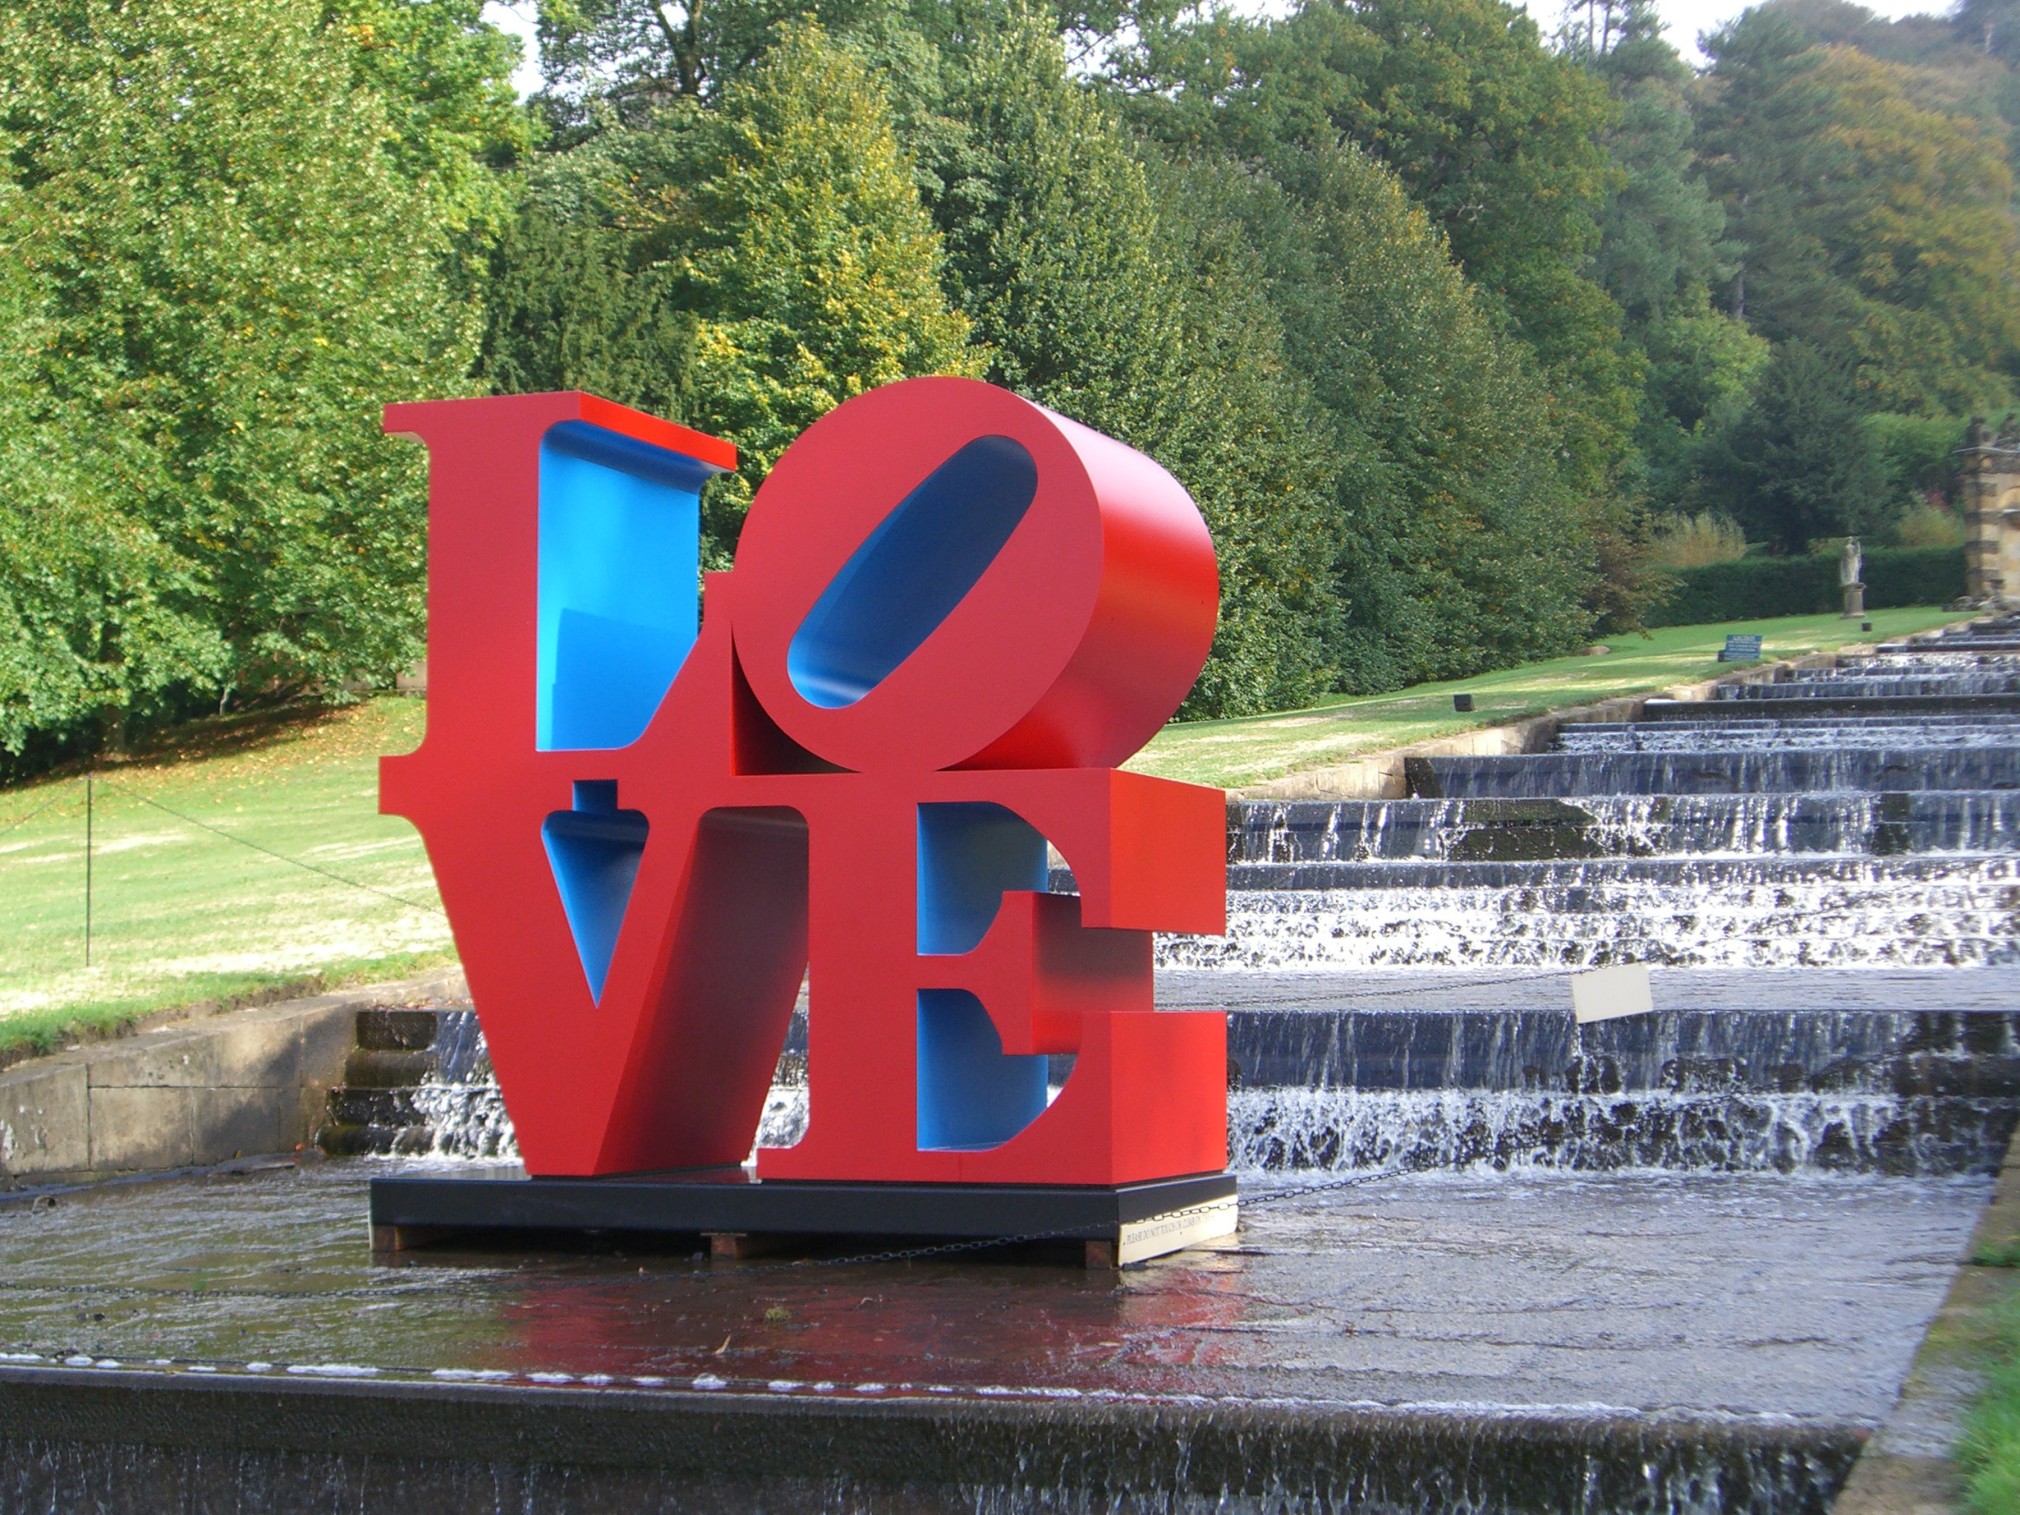 A 96 by 96 by 48 inch polychrome aluminum sculpture spelling love, consisting the letters L and a tilted letter O on top of the letters V and E. The outsides of the letters are the color red, and the insides are blue.